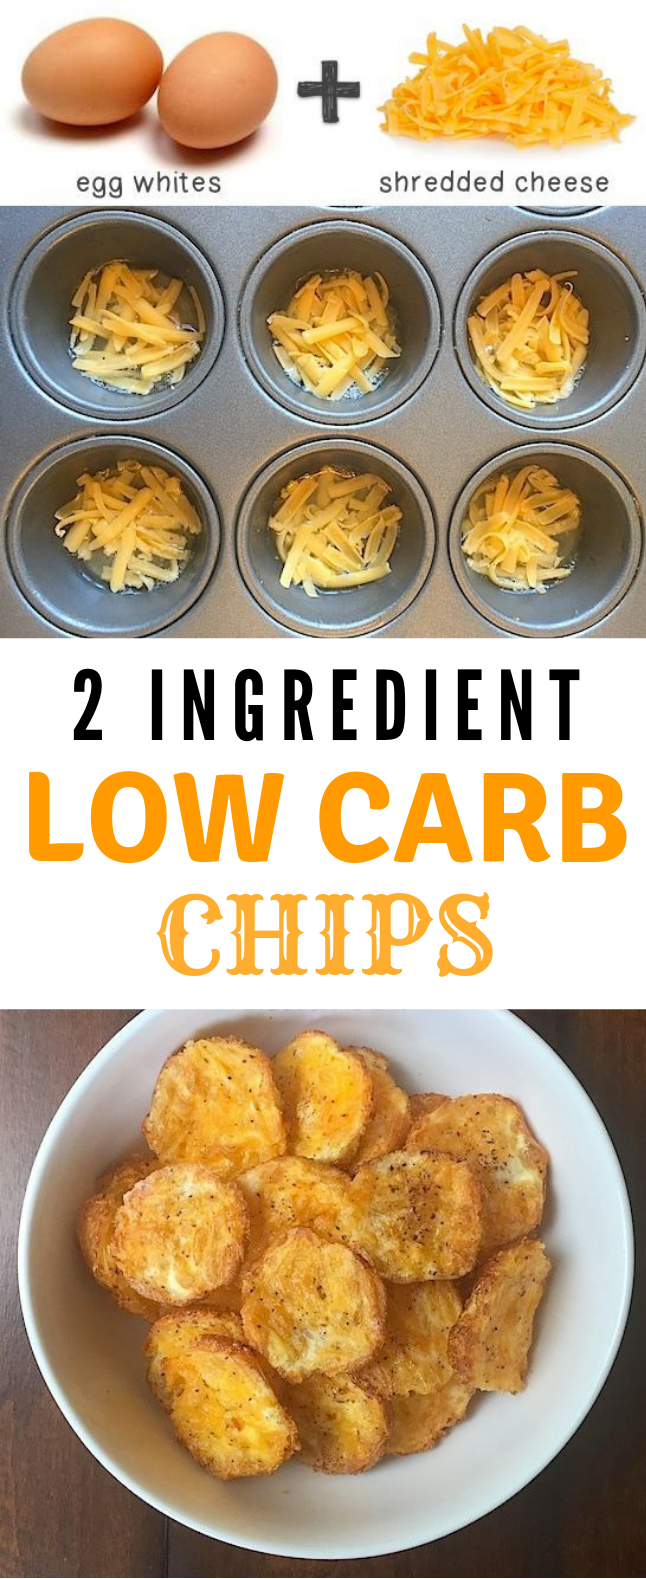 2 Ingredient Low Carb Chips #LowCarb #Chips